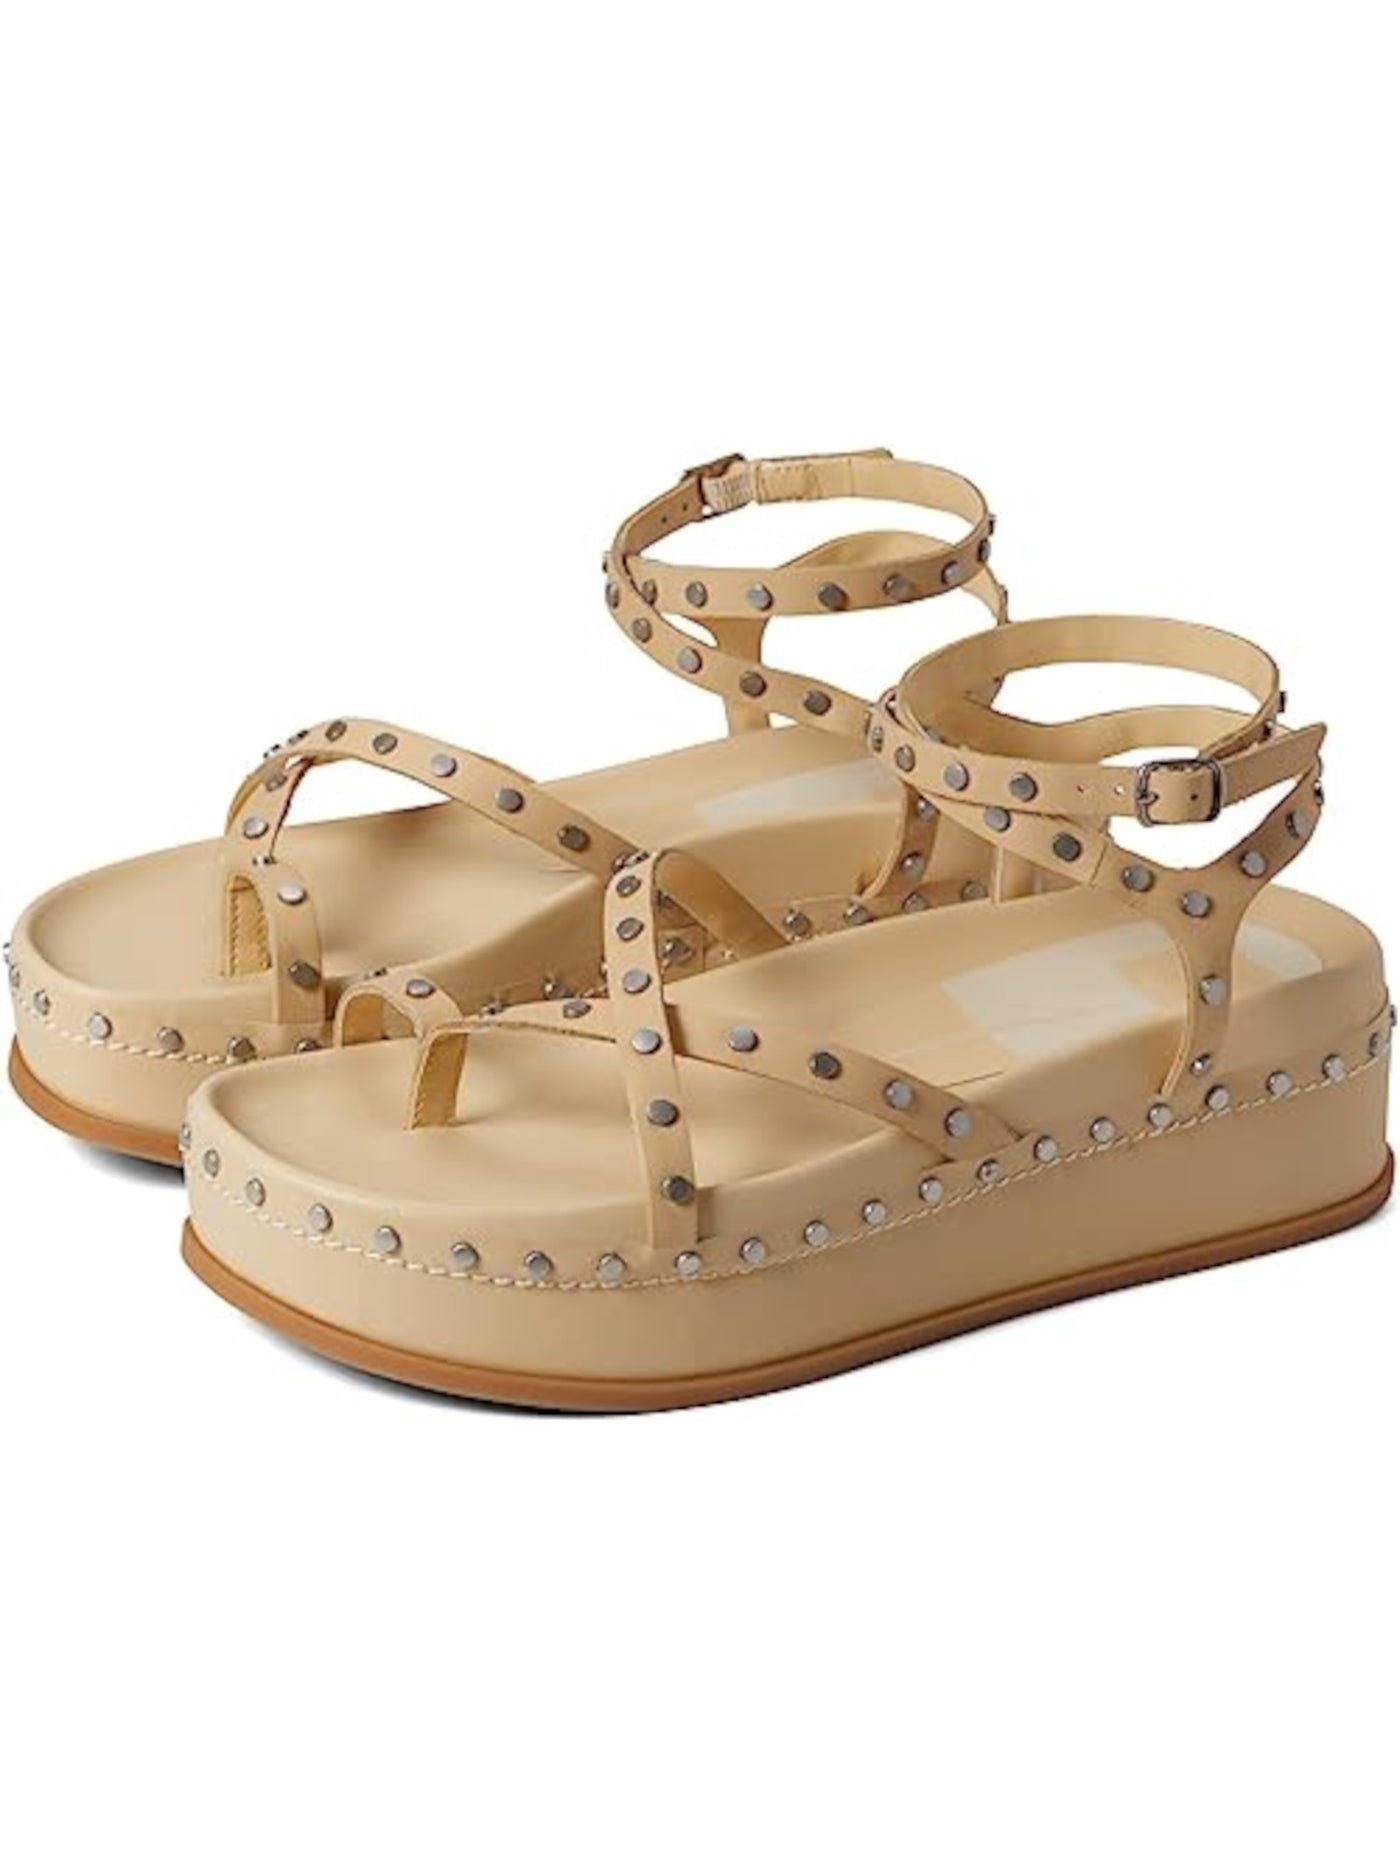 DOLCE VITA Womens Vanilla Beige Strappy Ankle Strap Studded Welma Round Toe Platform Buckle Leather Sandals Shoes 6 M